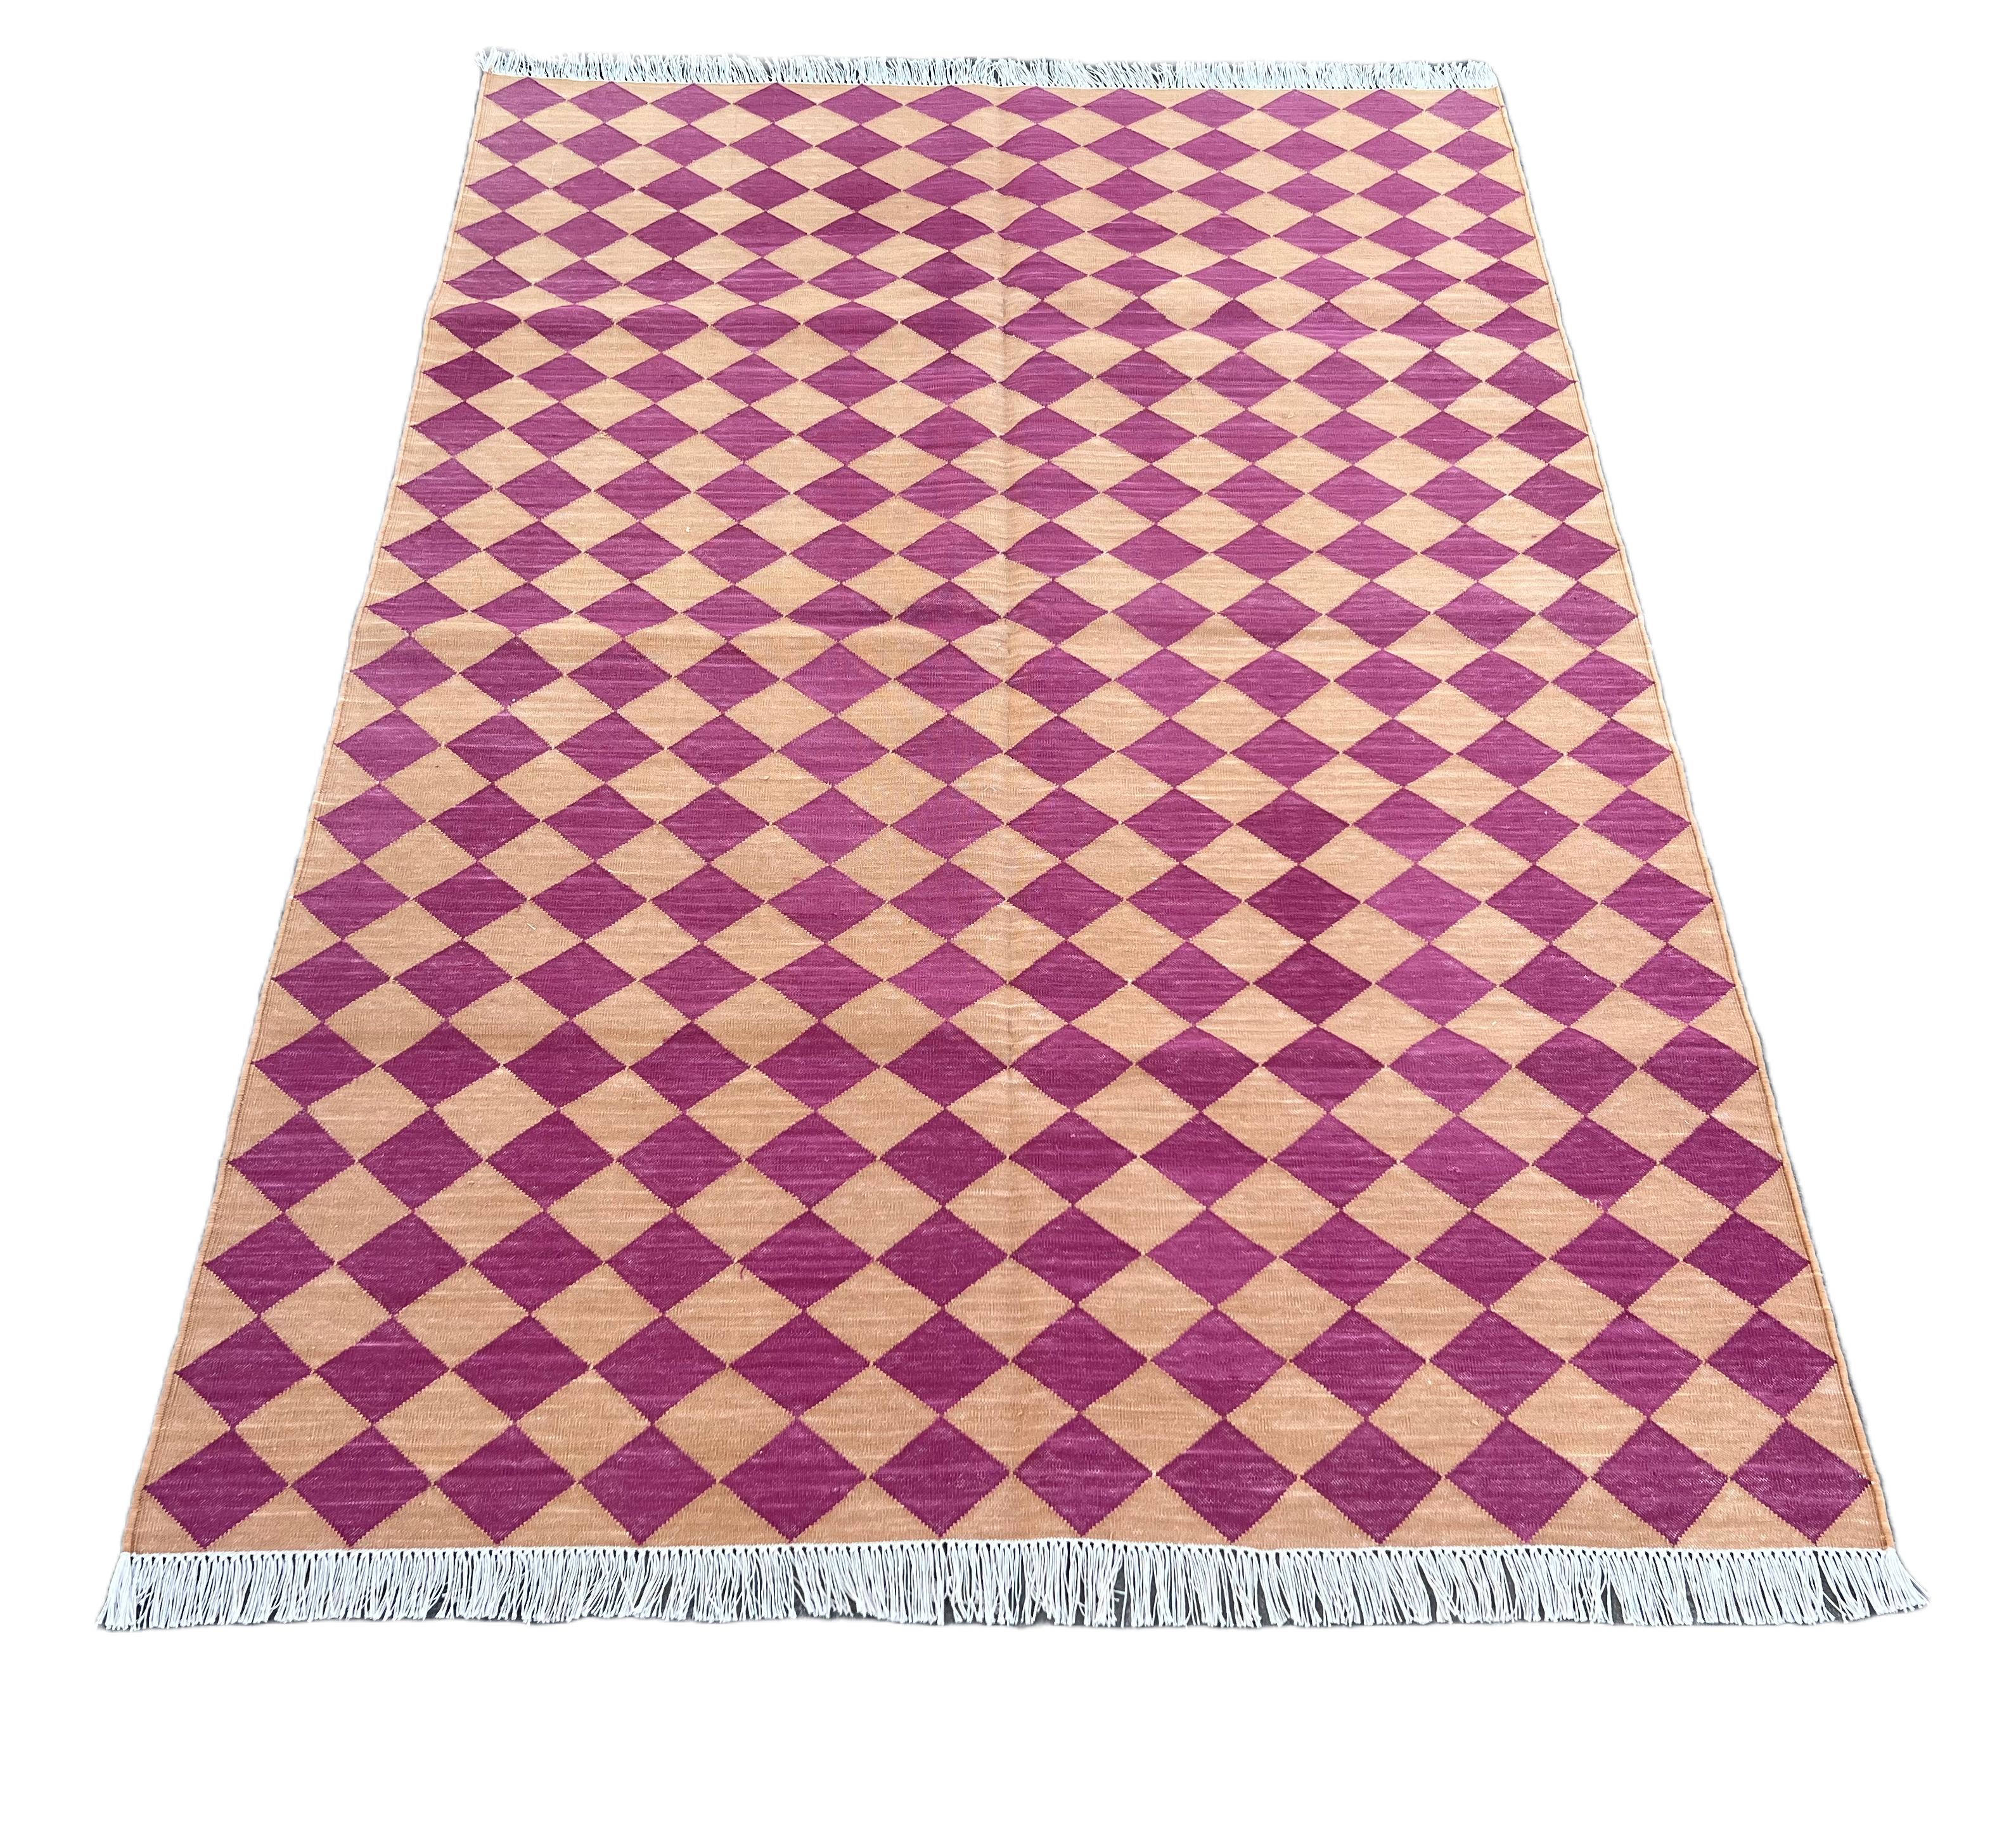 Contemporary Handmade Cotton Area Flat Weave Rug, 4x6 Pink And Tan Checked Indian Dhurrie Rug For Sale